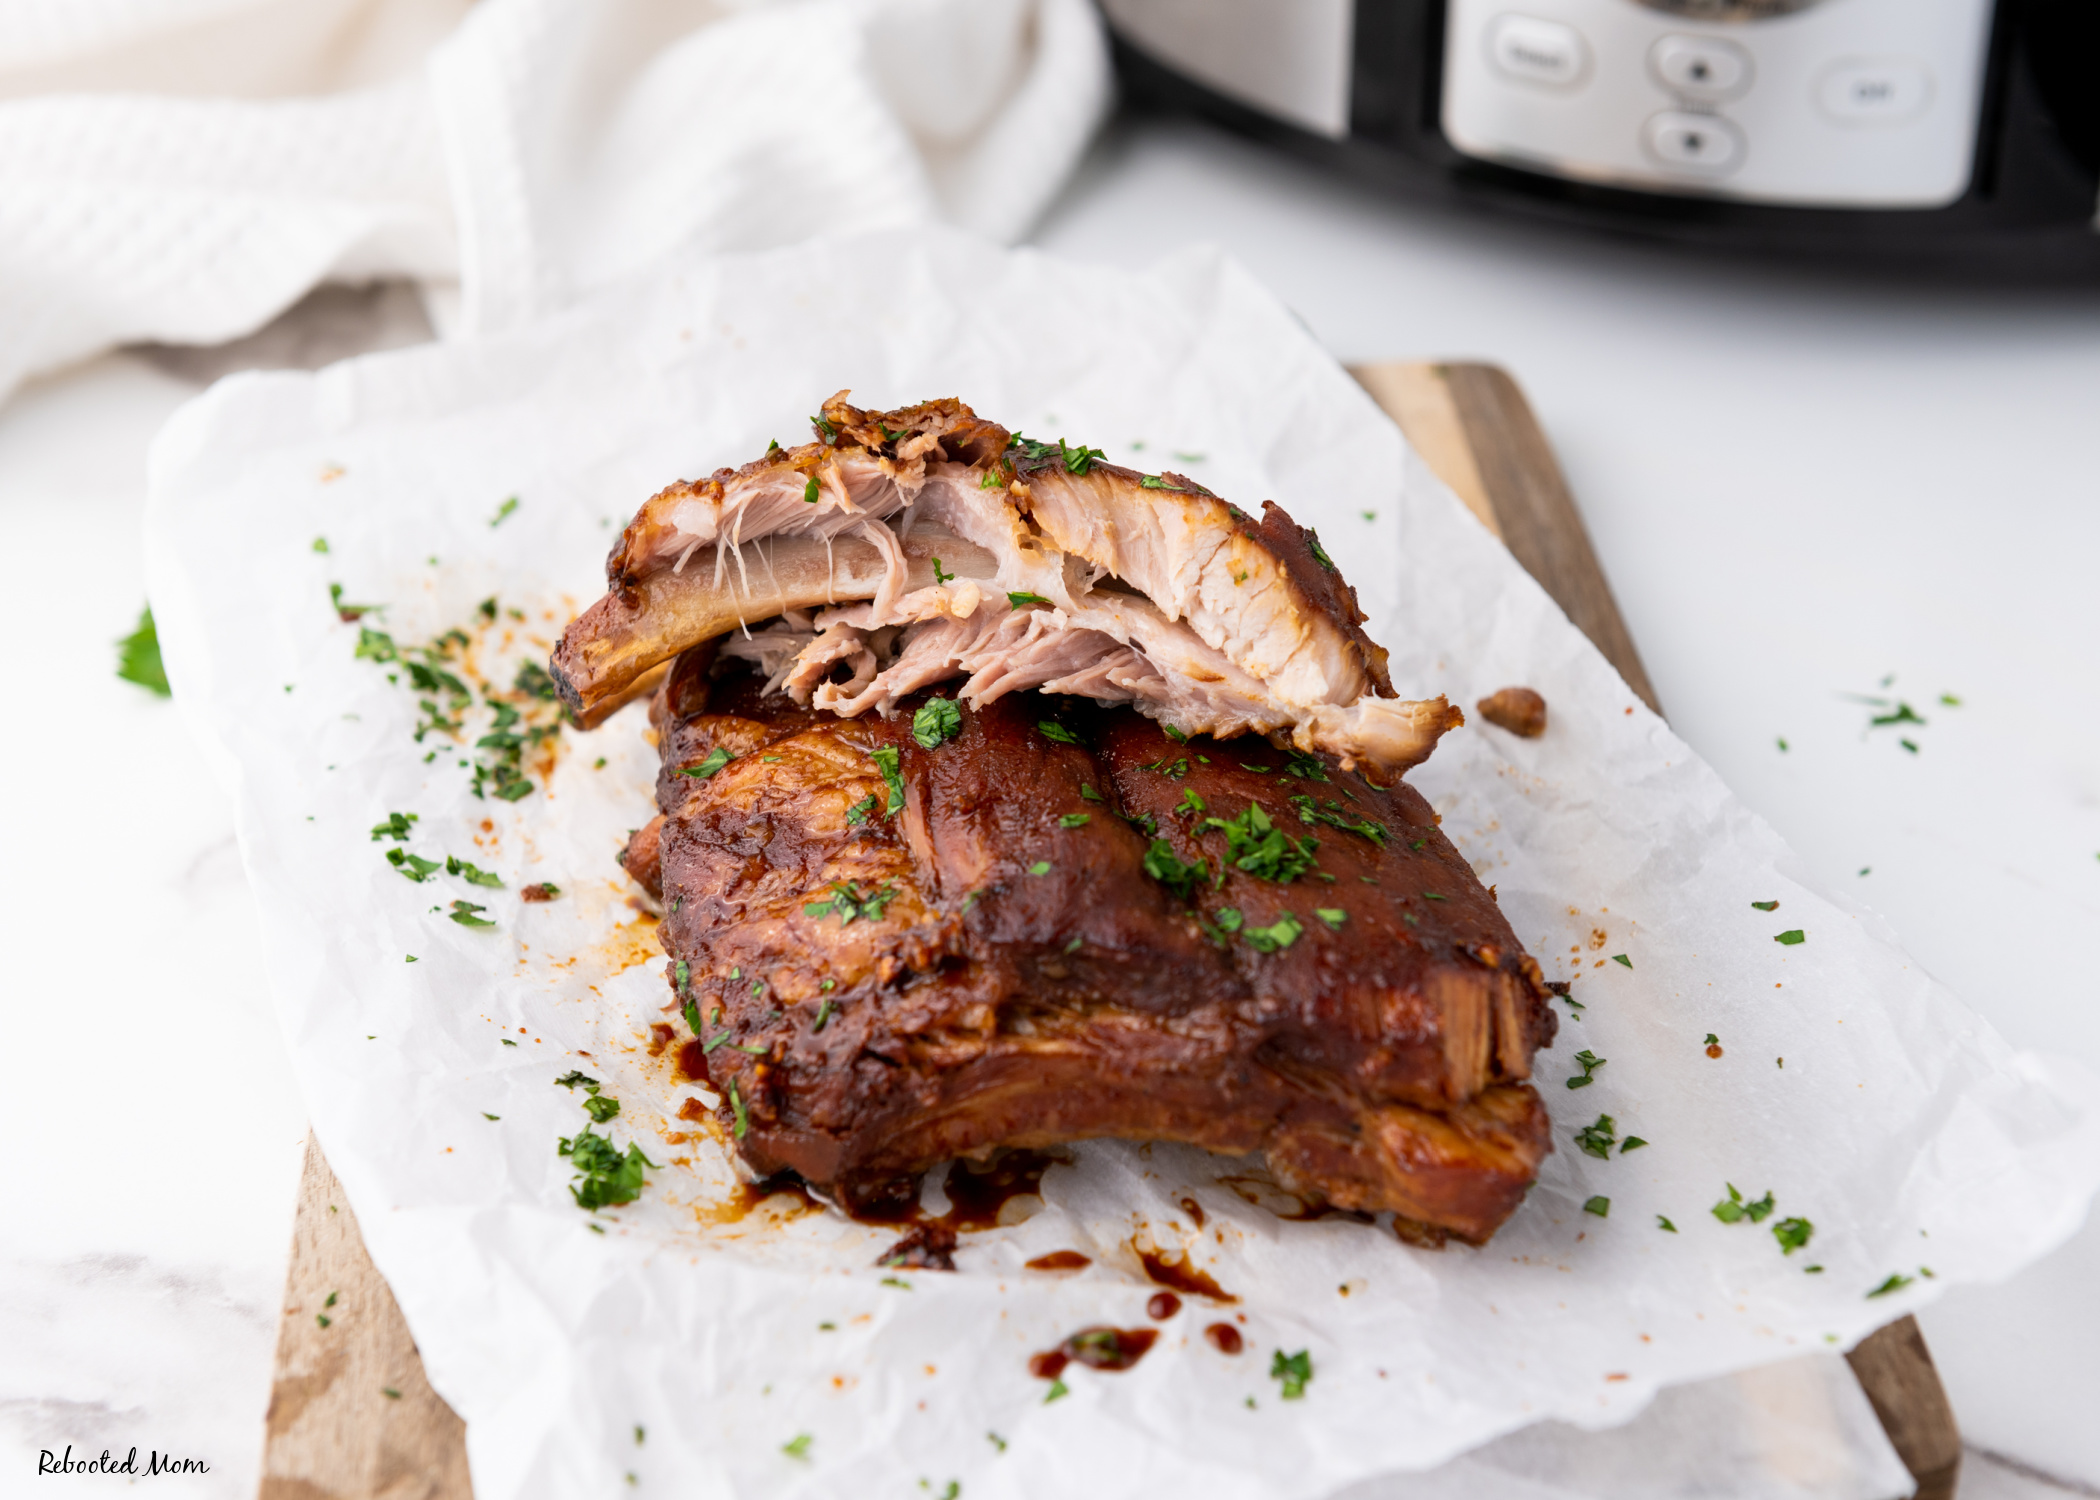 Slow Cooker Soy Spareribs come together easily with a handful of simple ingredients that result in the most addictive, flavorful ribs you'll ever try!